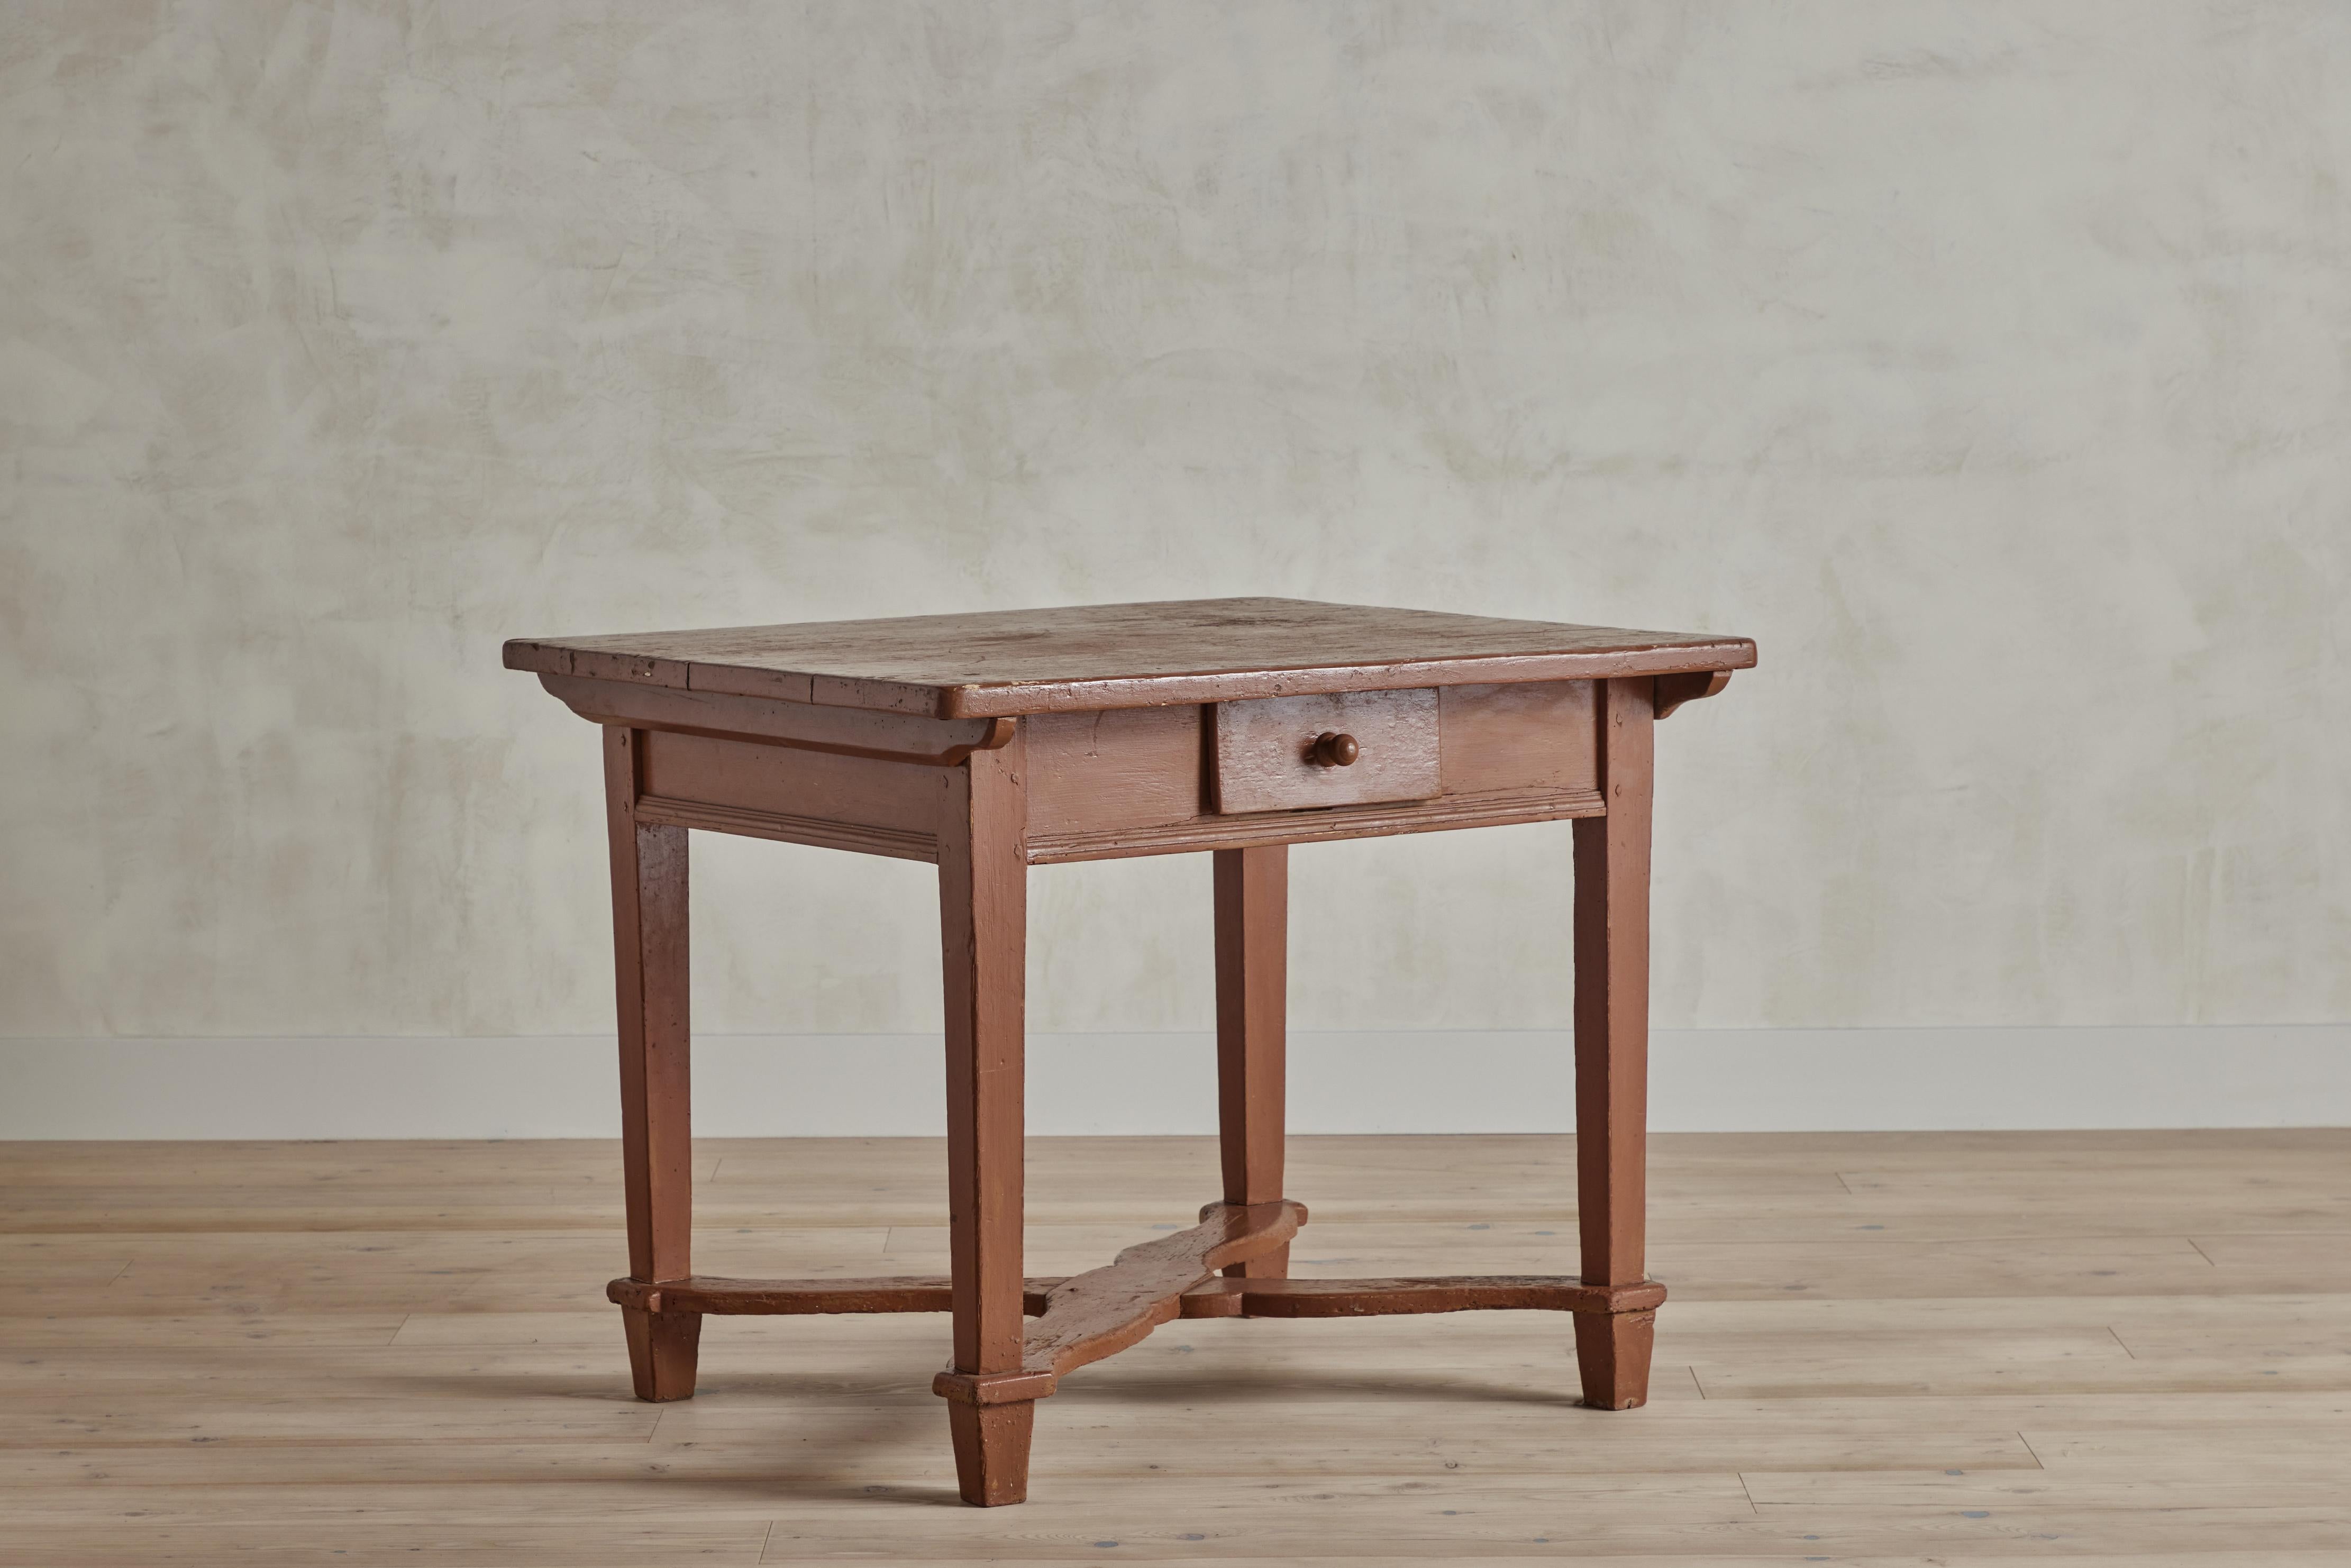 Nineteenth century American tawny brown painted side table with a single drawer and cross support. Painted finish and wood shows wear throughout that is consistent with age and use.